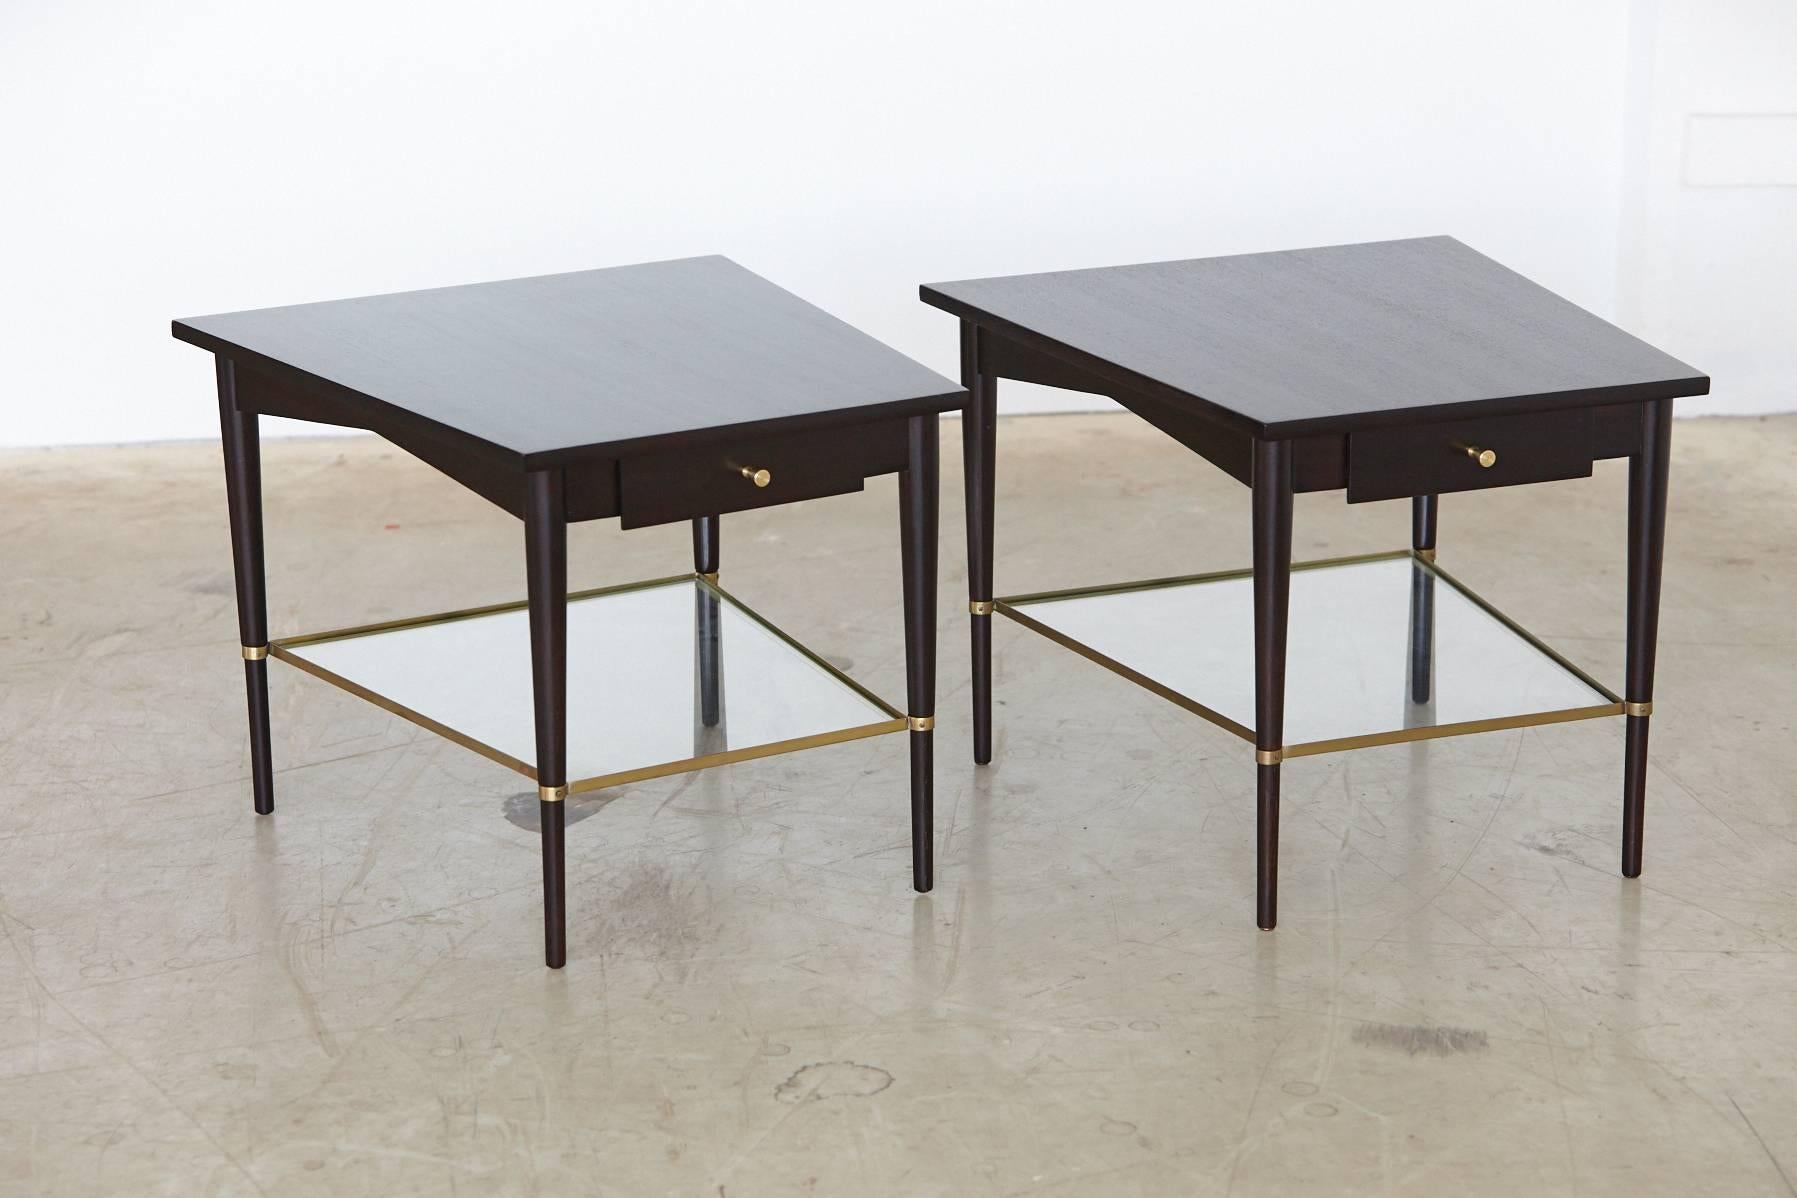 Elegant and very rare pair of trapezoidal ebonized end or side tables with brass frames and glass shelves. The drawers are equipped with the signature hourglass brass pulls.
The tables are from Paul McCobb's Connoisseur collection for H. Sacks &